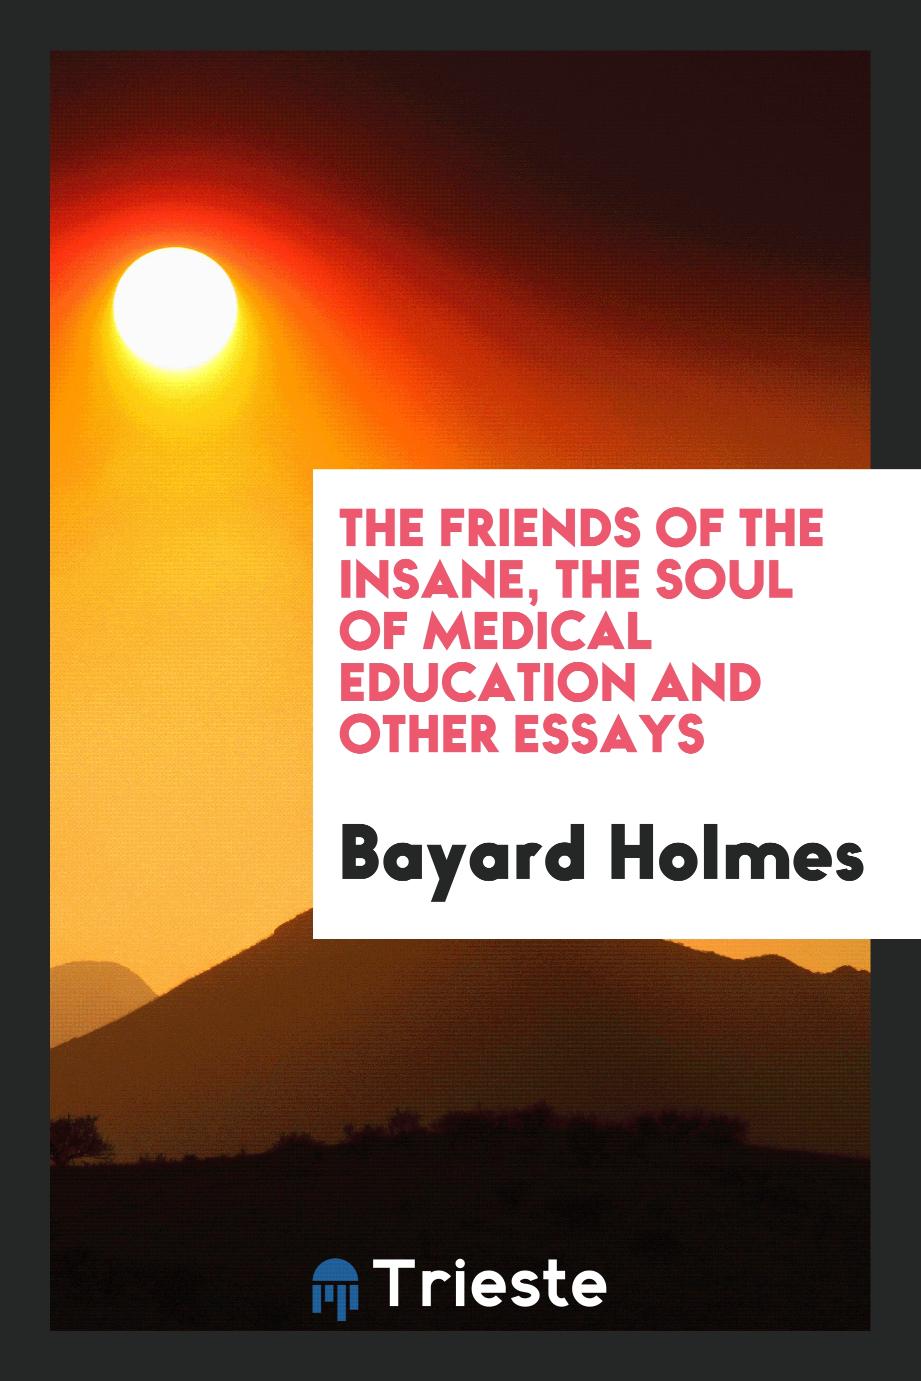 The friends of the insane, The soul of medical education and other essays